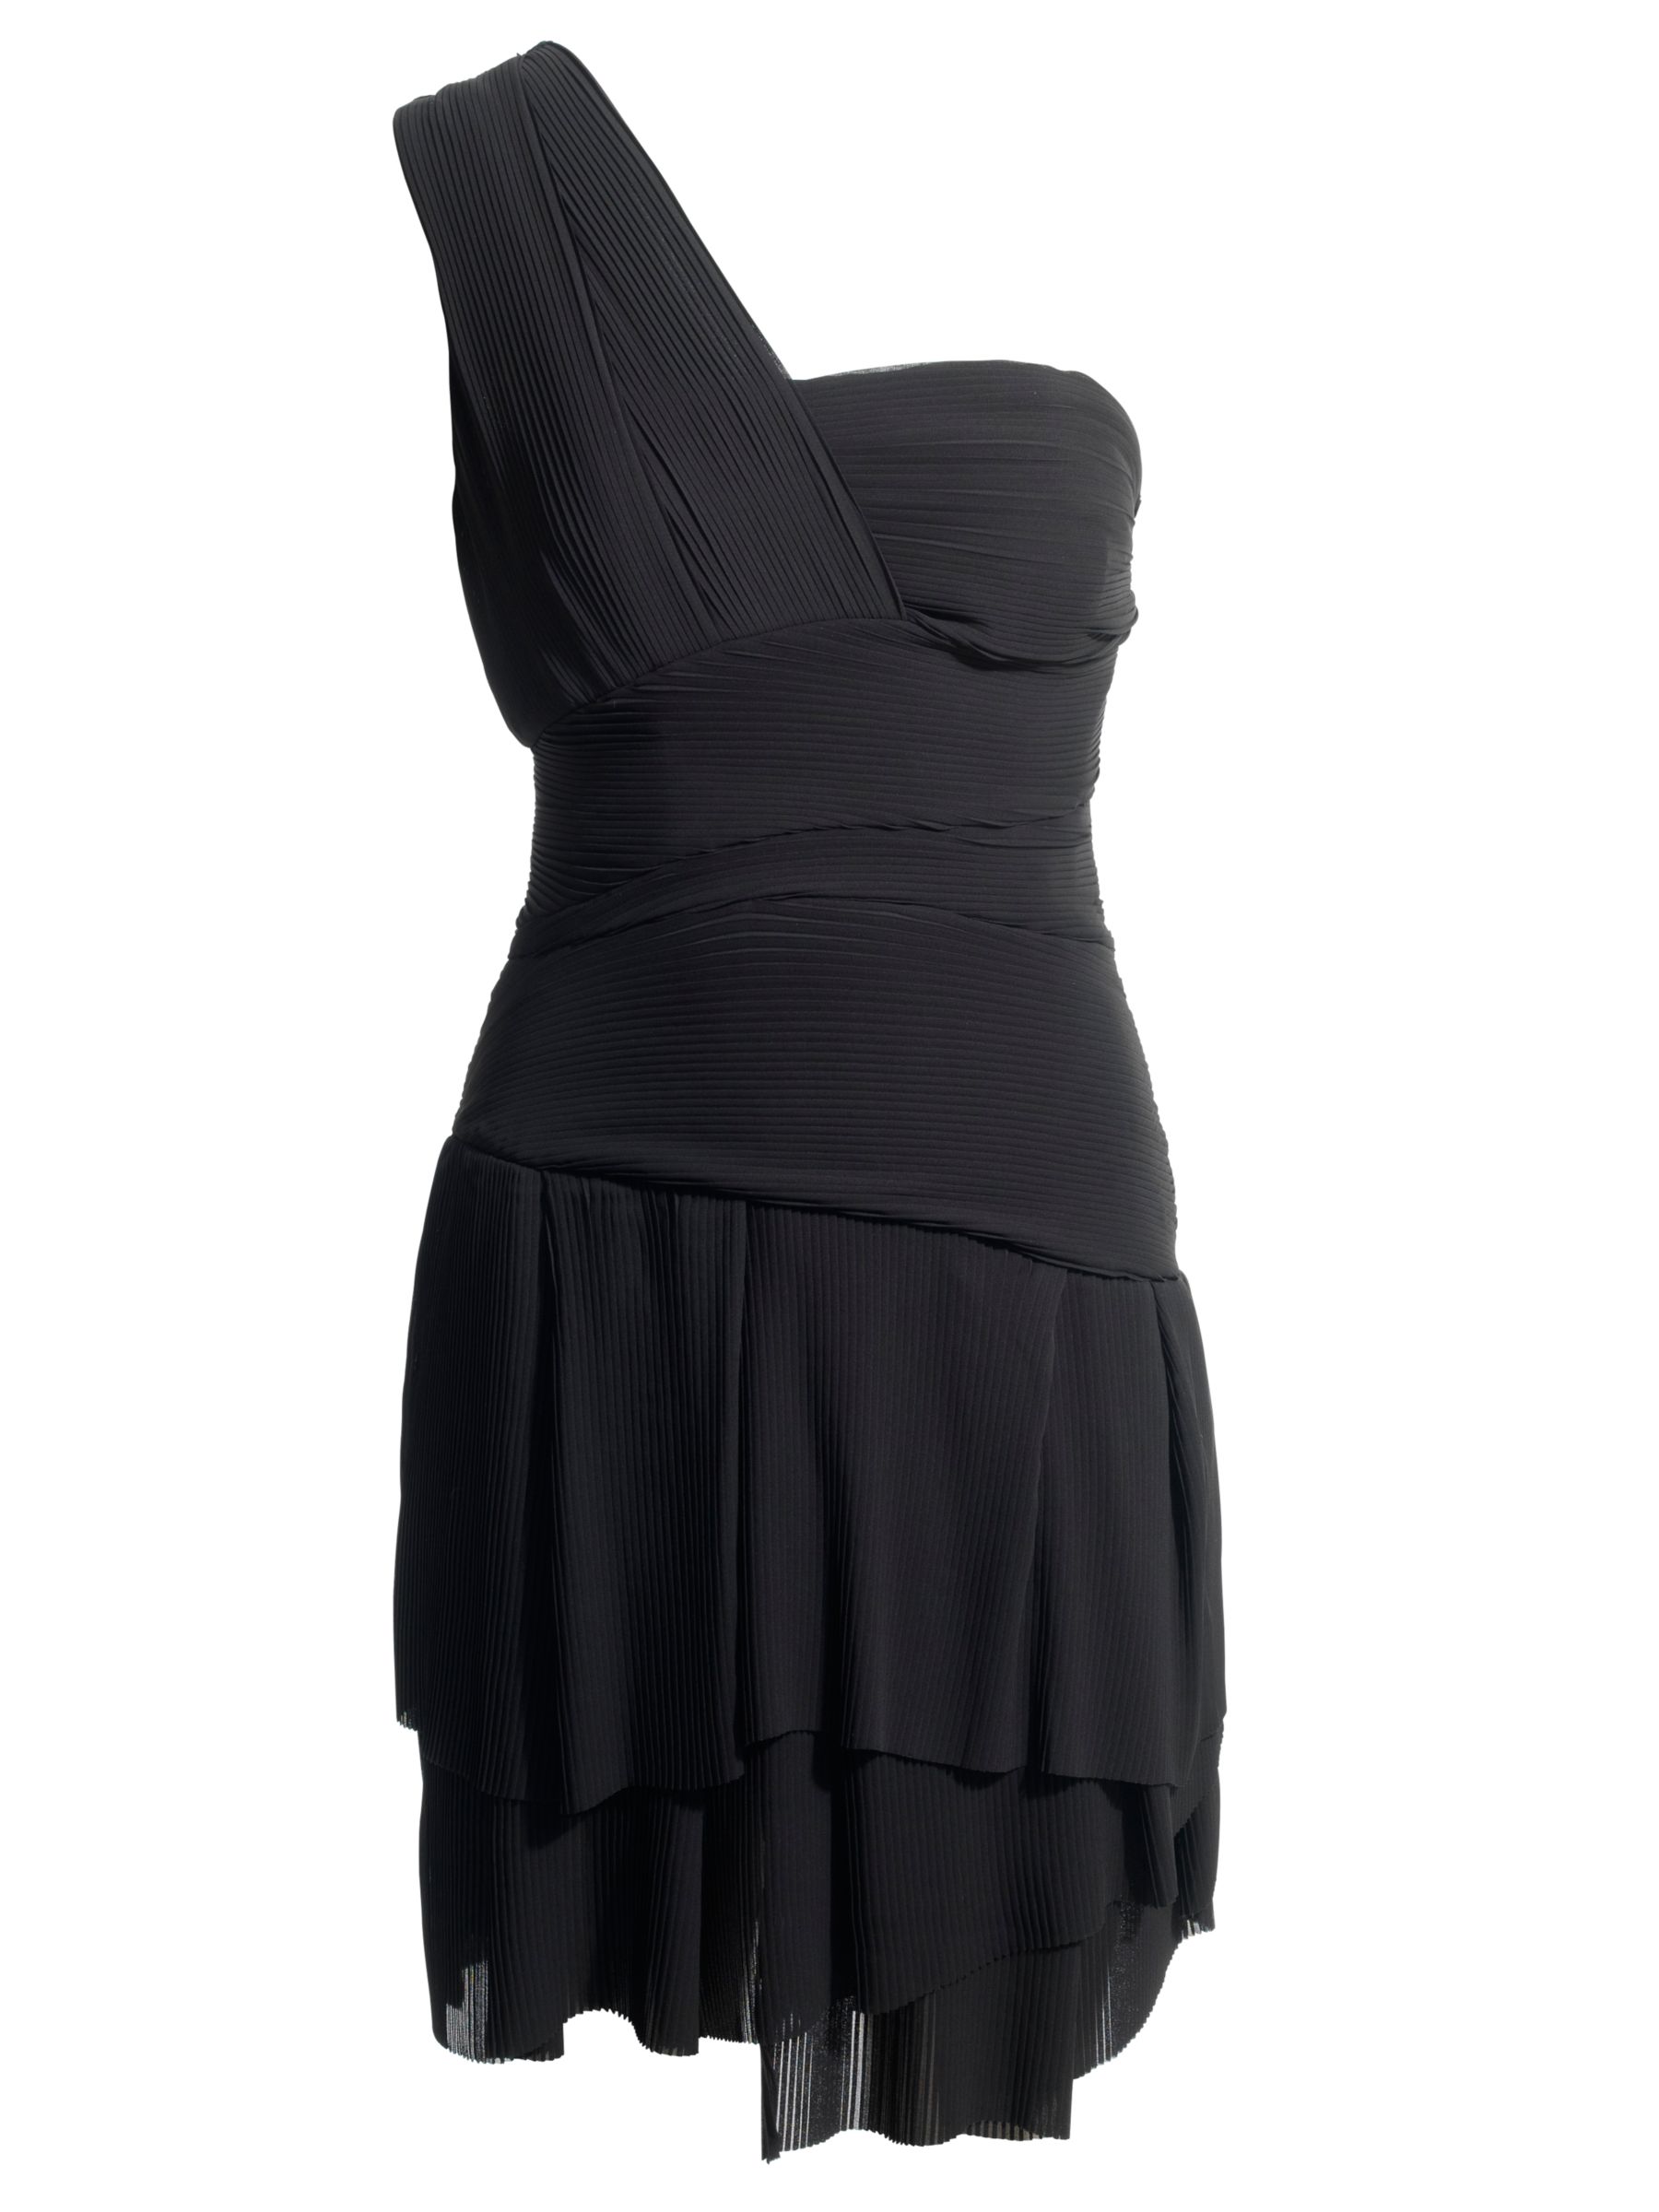 Reiss Dacey Pleated Frill Dress, Black at John Lewis